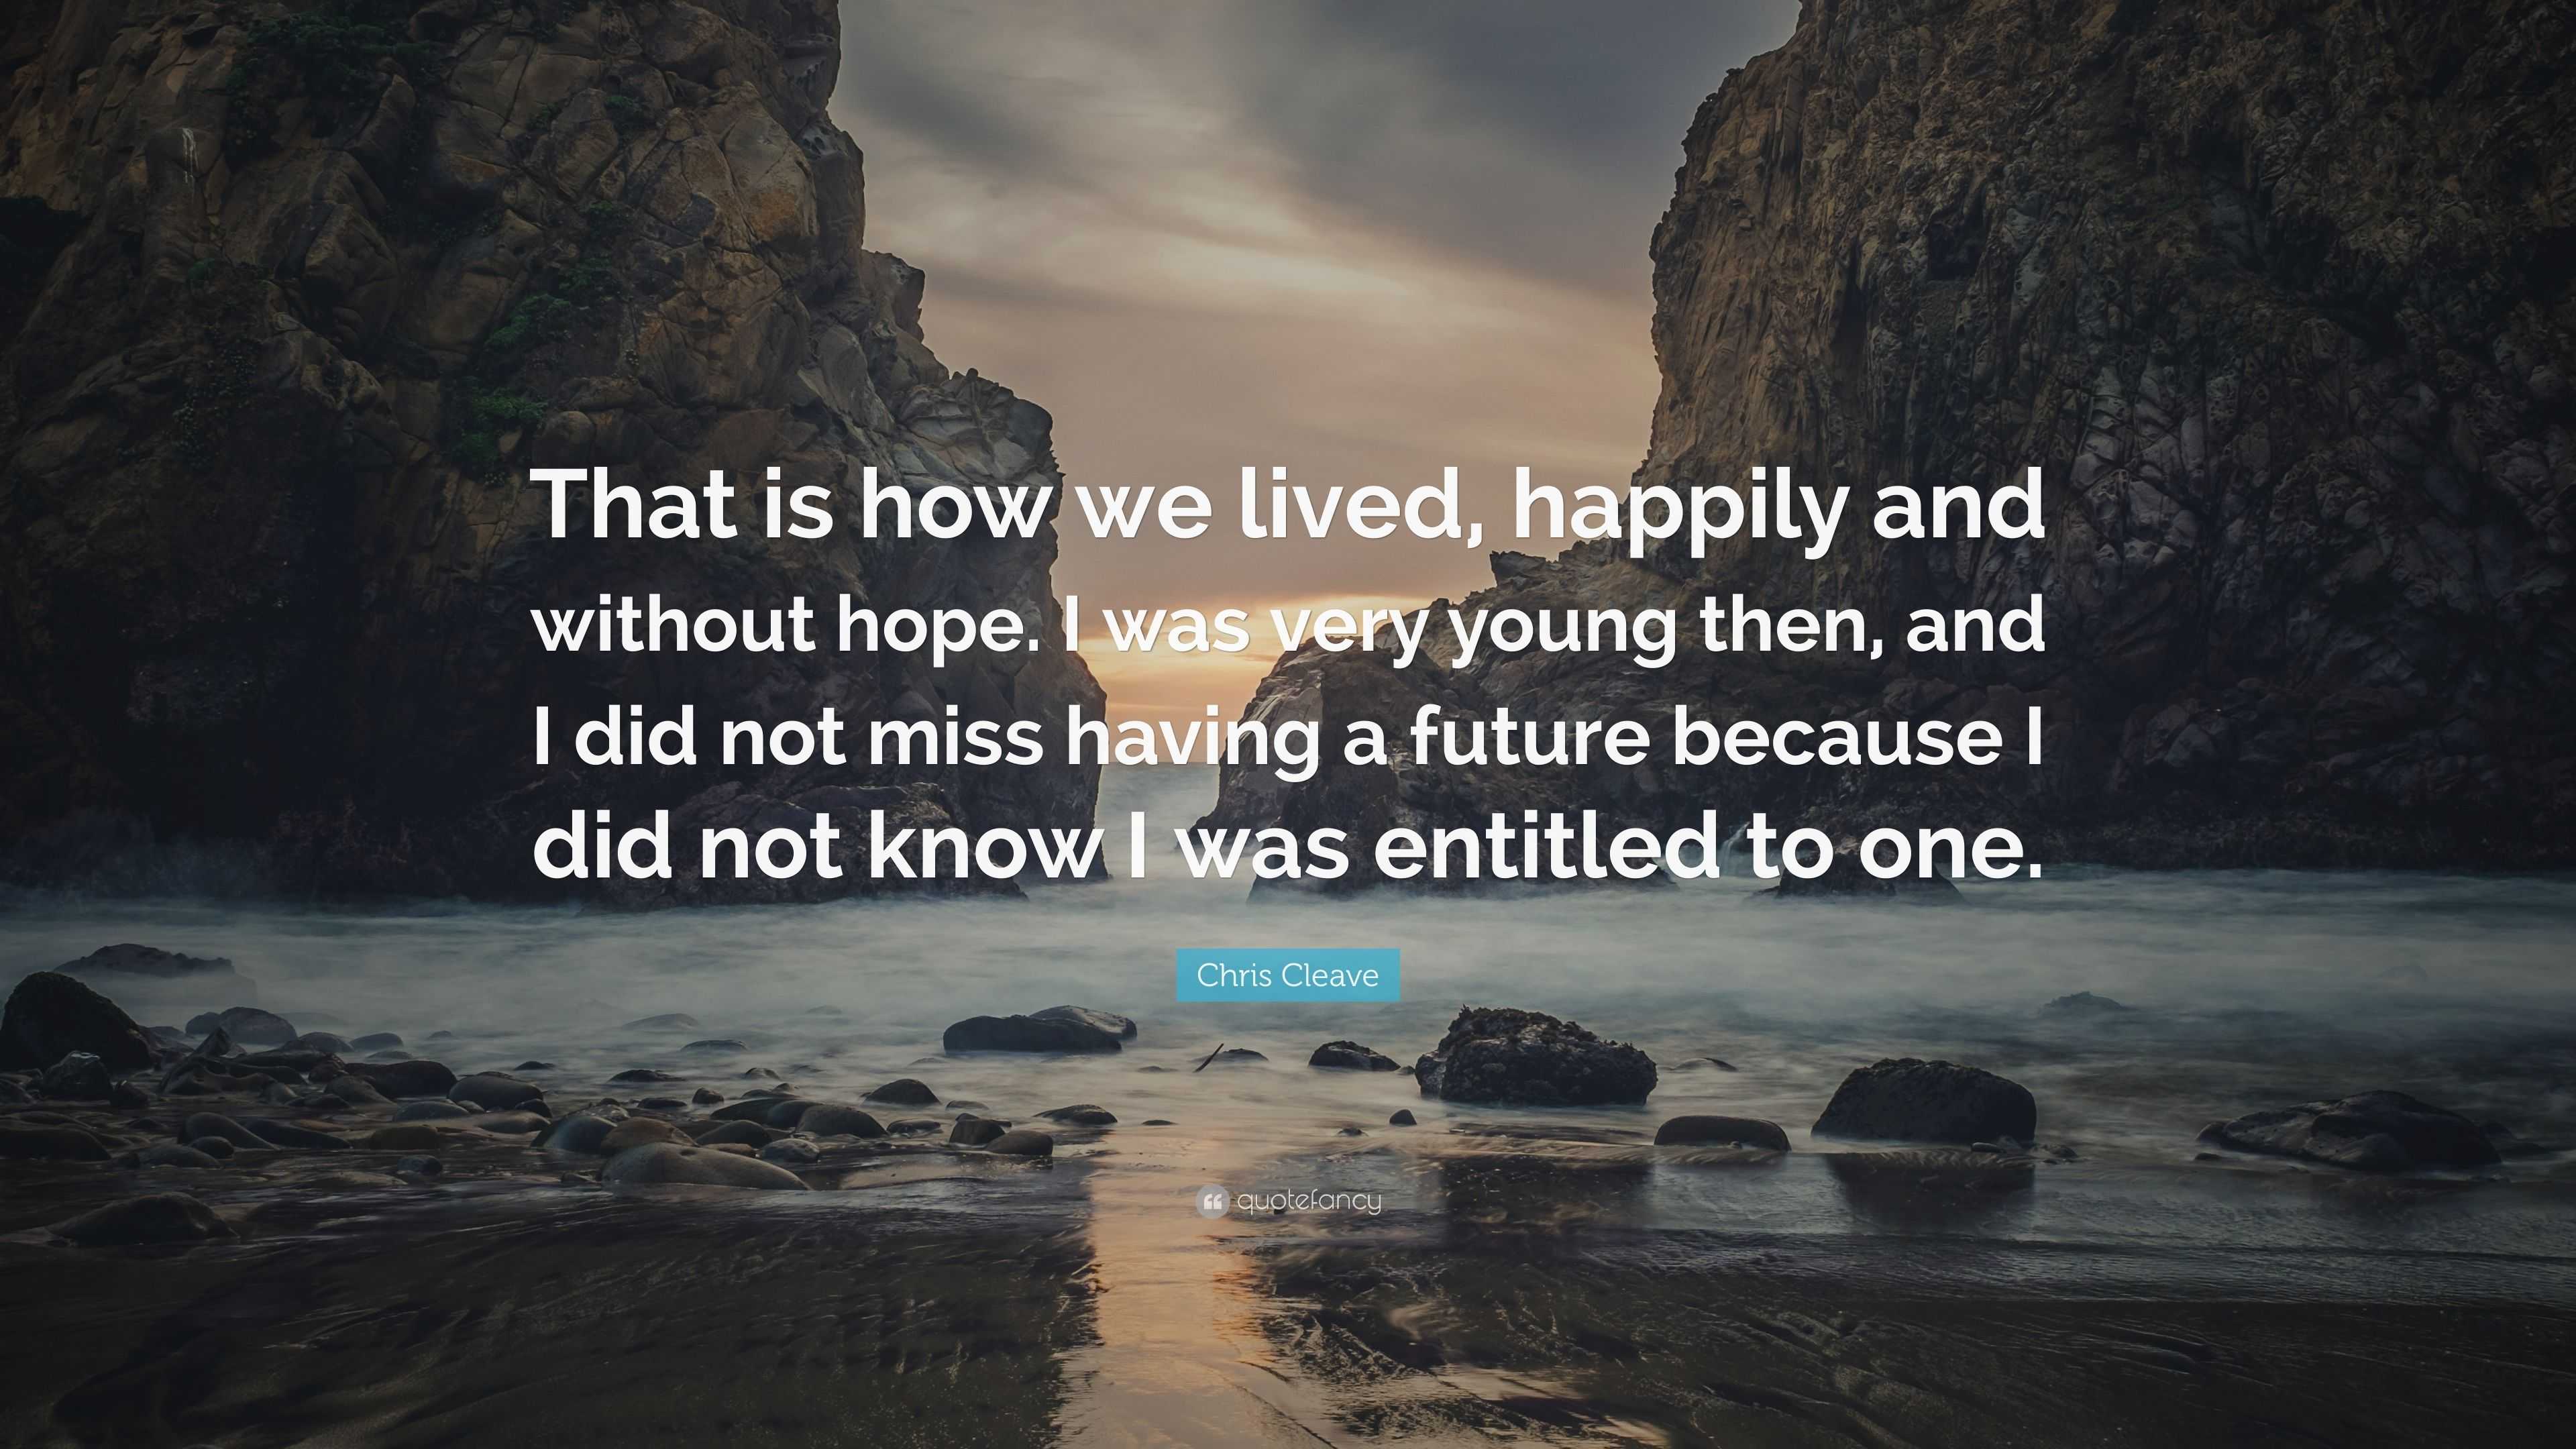 Chris Cleave Quote: “That is how we lived, happily and without hope. I ...